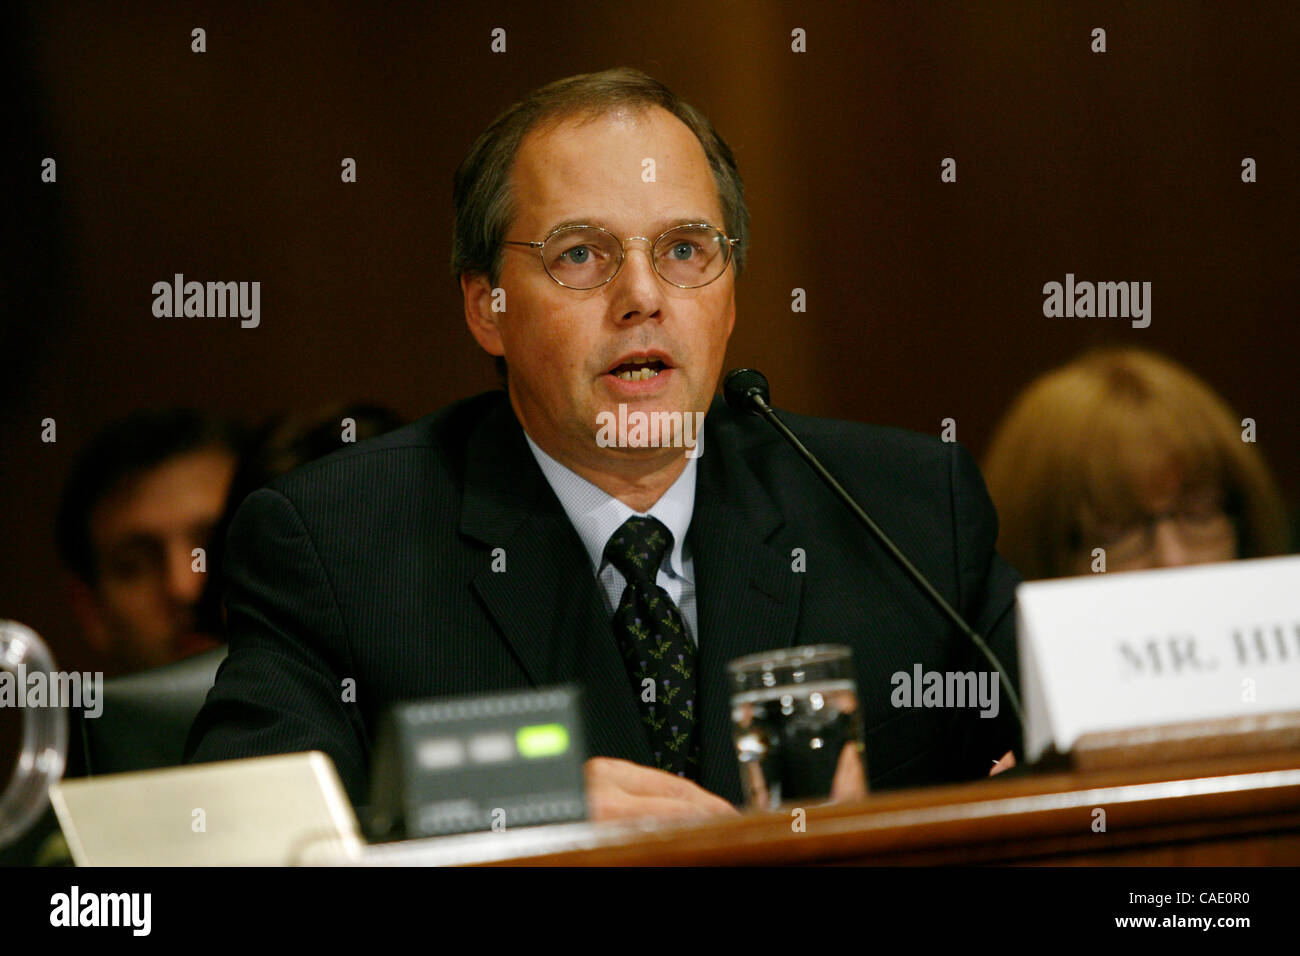 July 21, 2010 - Washington, D.C, U.S. - Washington, D.C. - July 21st:  Managing director of the Financial Markets and Community Investment Team at Government Accountability Office RICHARD HILLMAN testifies before the Senate Finance Committee to give an update about the status of the Troubled Asset R Stock Photo